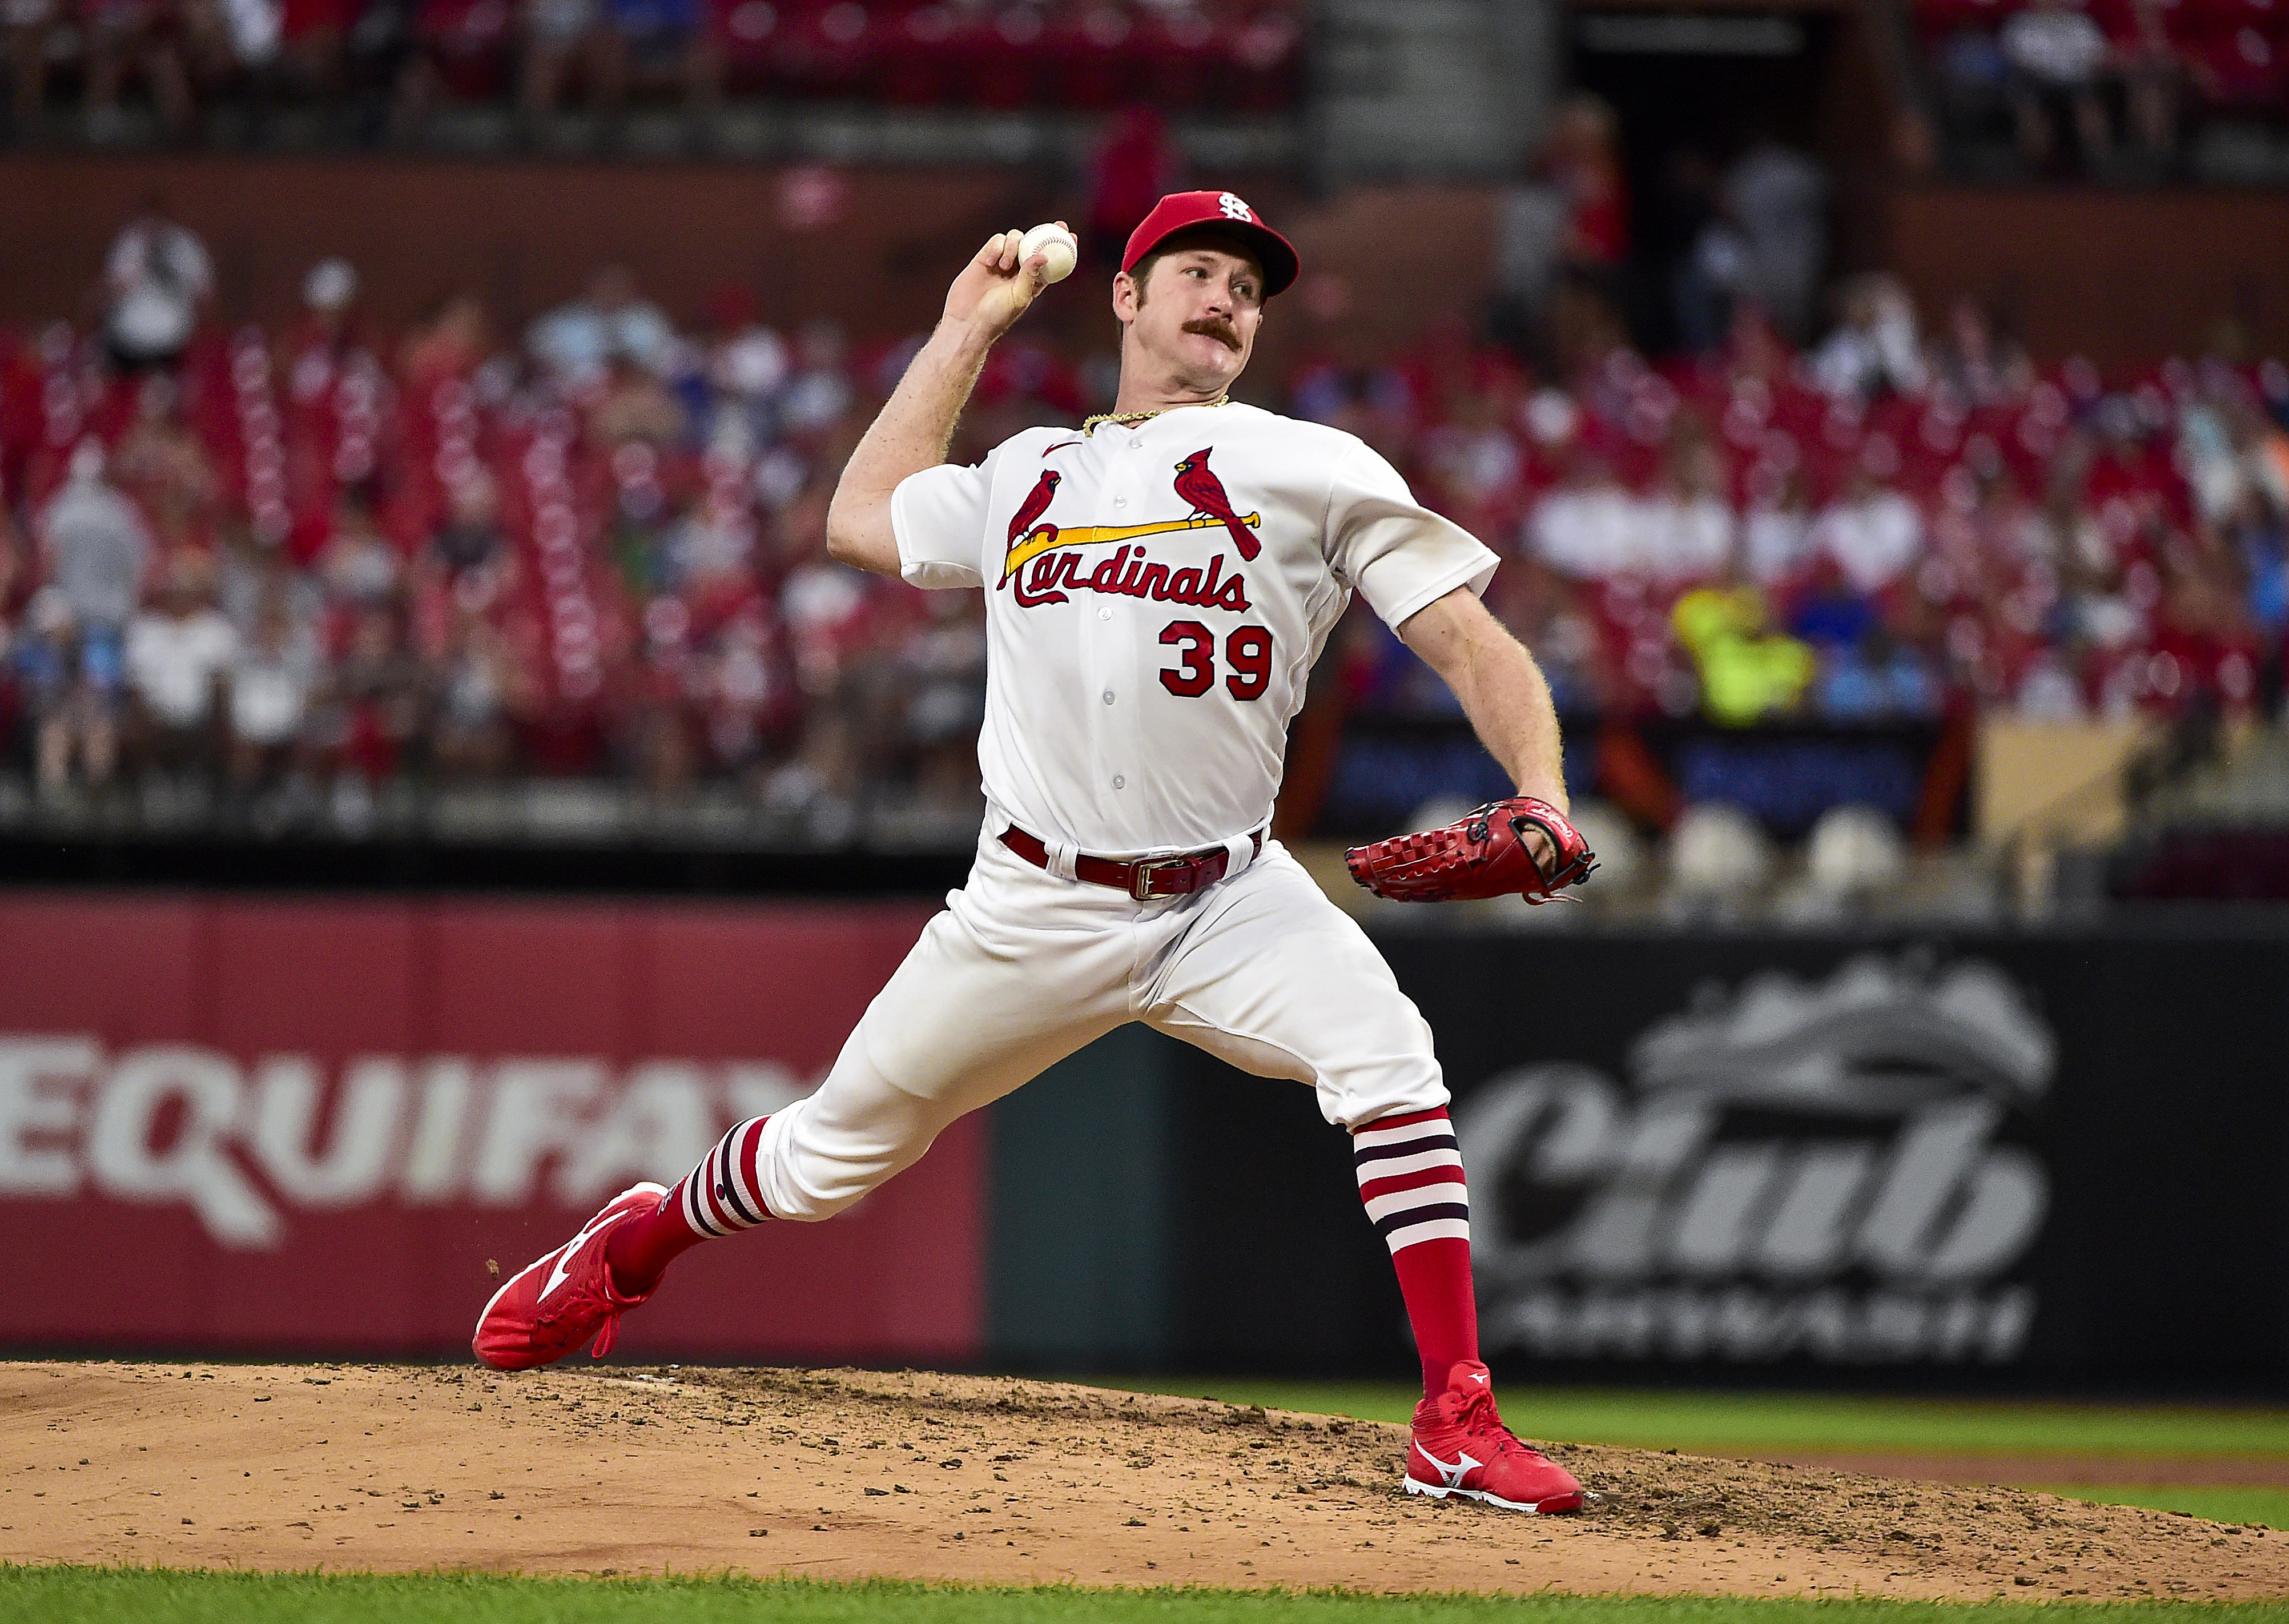 St. Louis Cardinals drop opening day game against Toronto